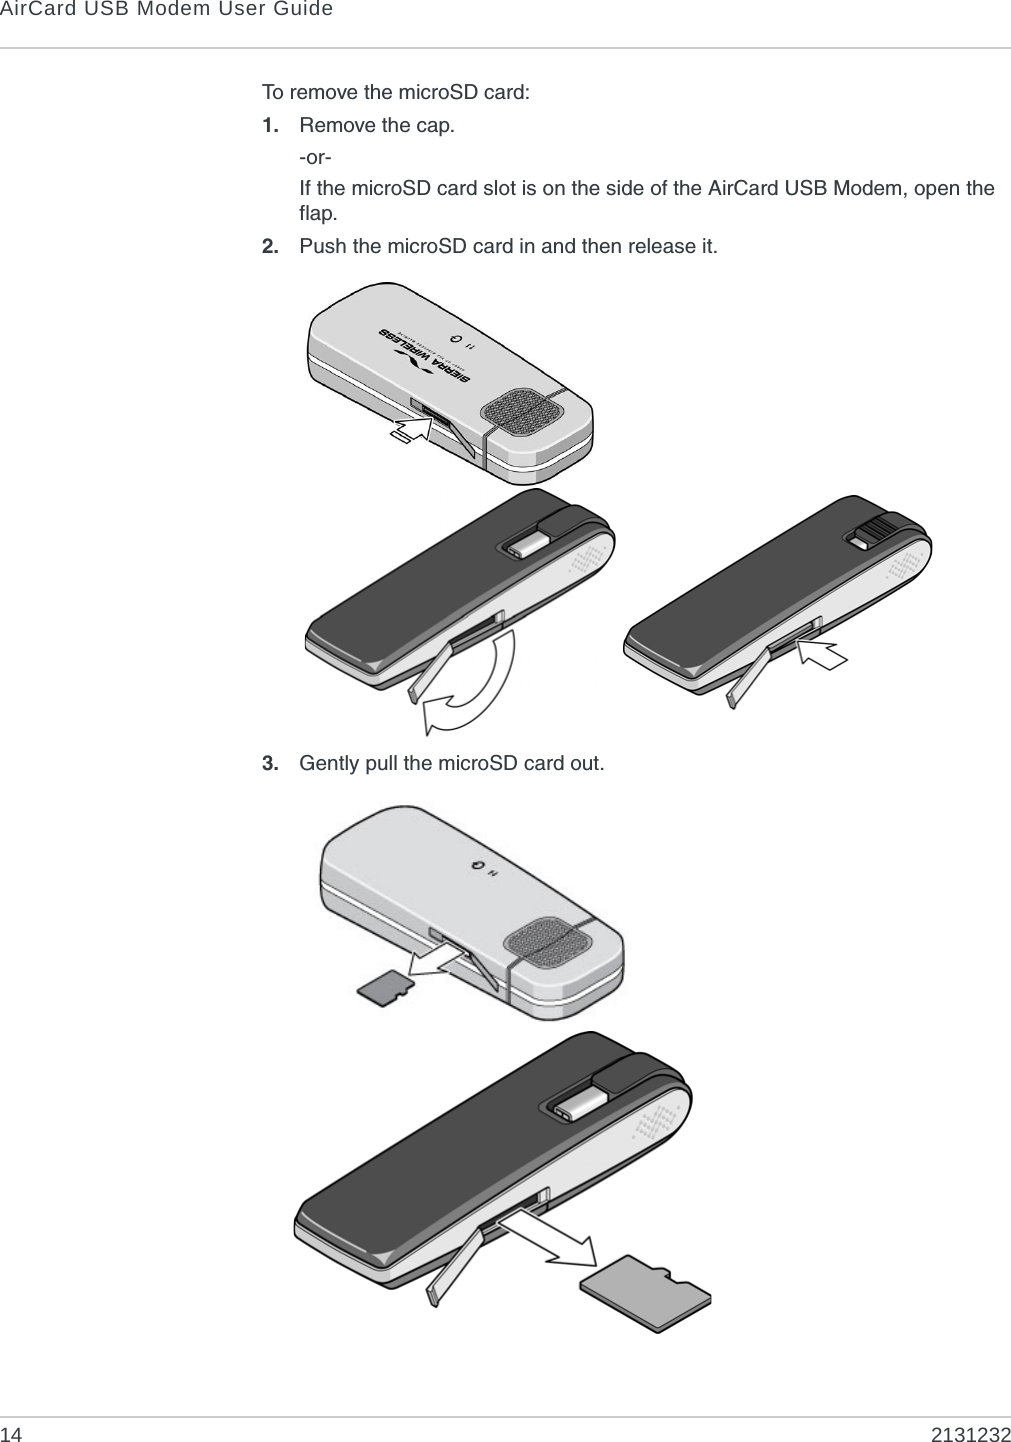 AirCard USB Modem User Guide14 2131232To remove the microSD card:1. Remove the cap.-or- If the microSD card slot is on the side of the AirCard USB Modem, open the flap.2. Push the microSD card in and then release it.3. Gently pull the microSD card out.